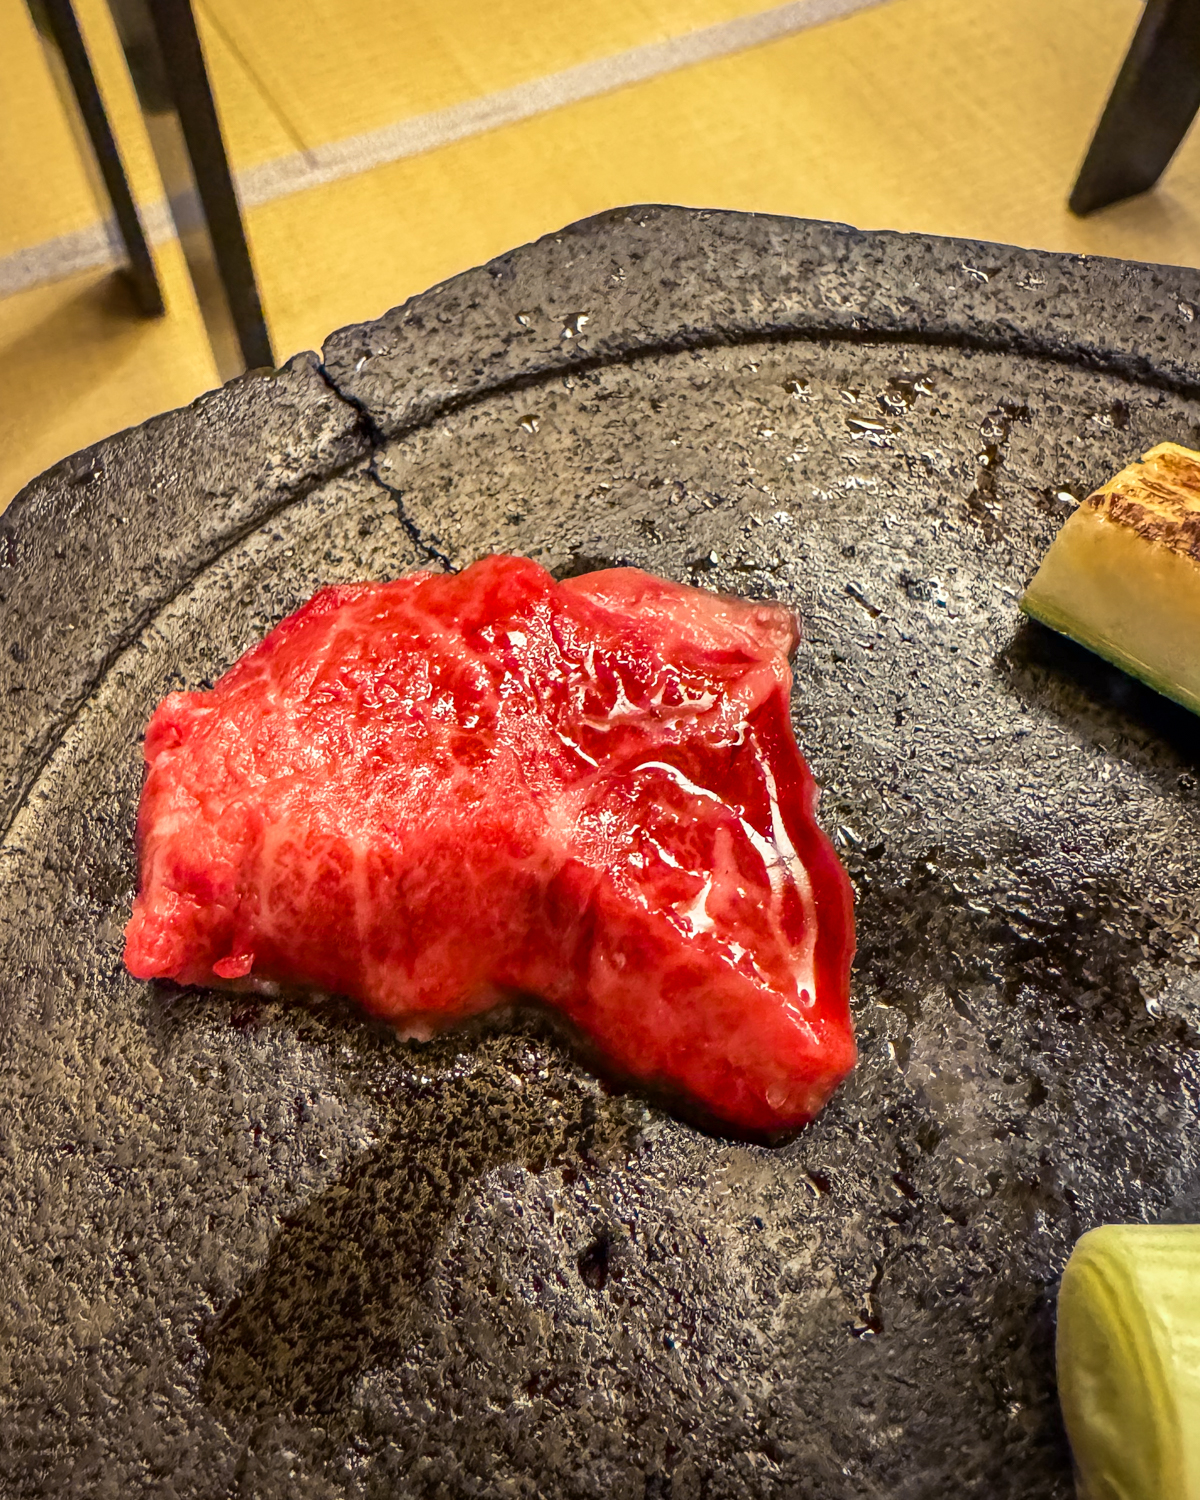 Piece of wagyu being grilled on the stone plate.